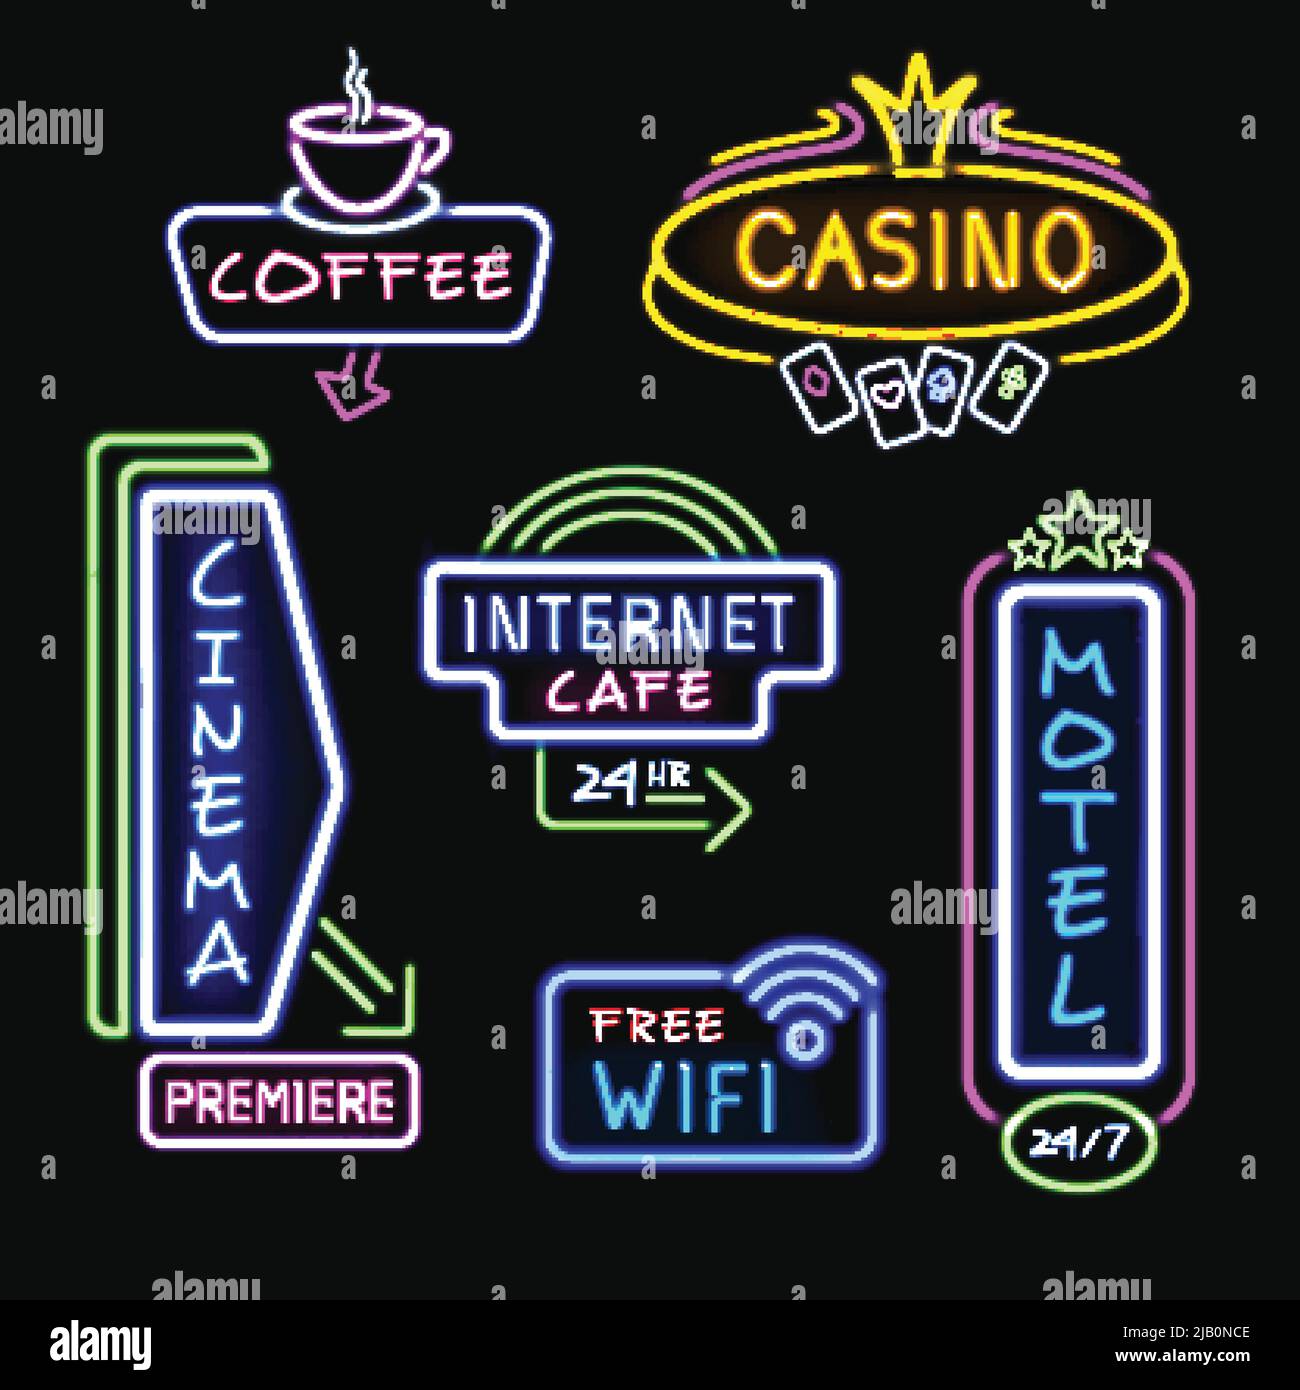 Neon hotel internet cafe cinema and casino signboards at night realistic icons collection isolated vector illustration Stock Vector